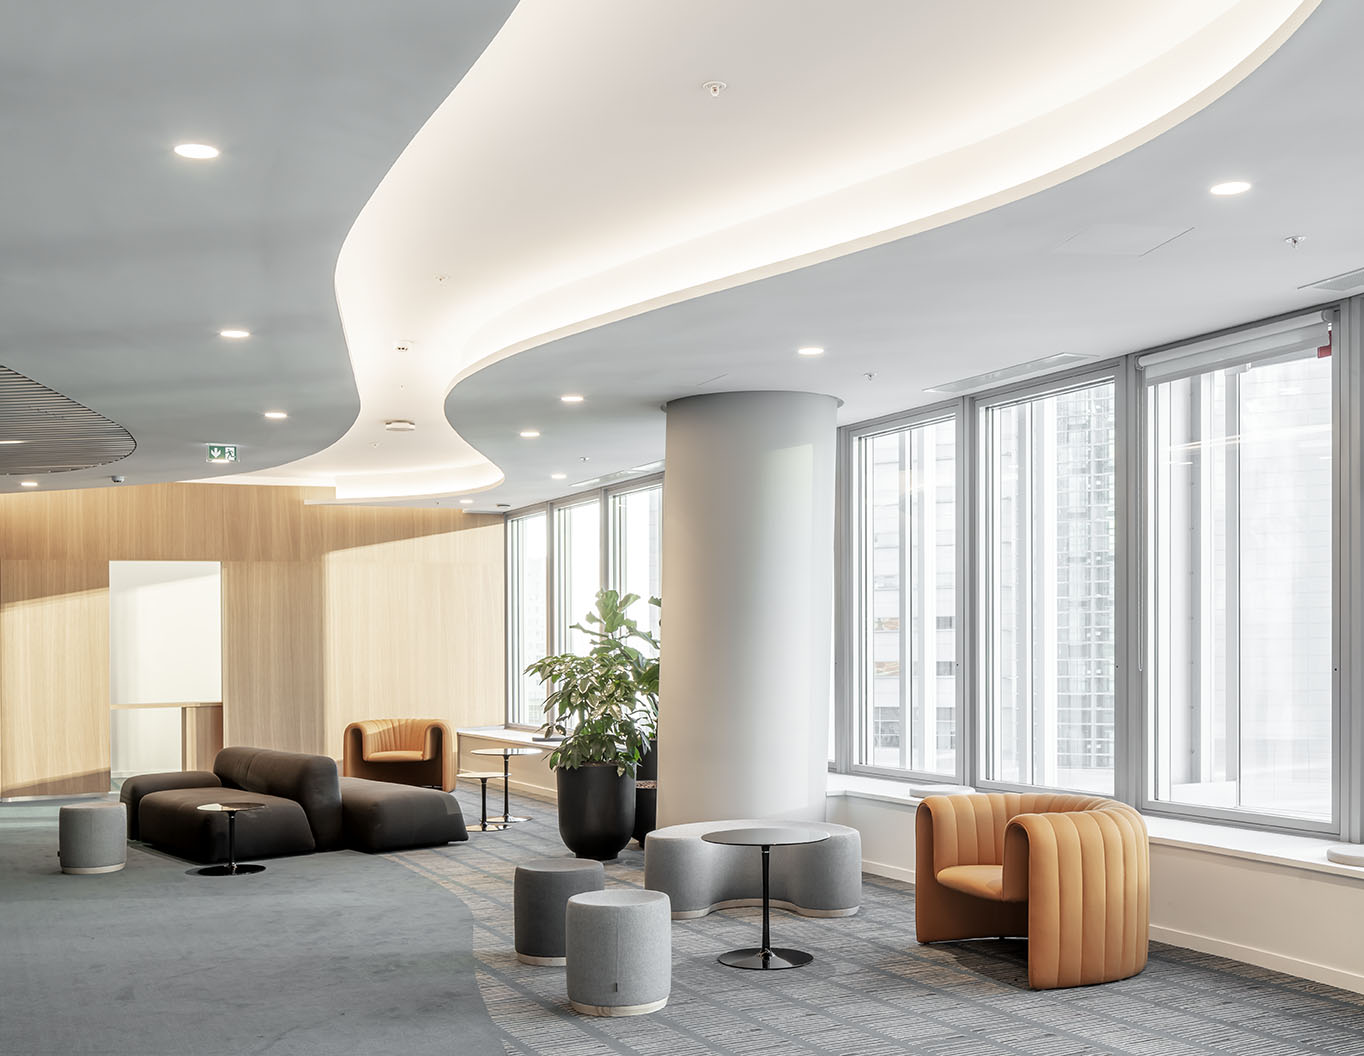 Meeting room of the Alto Tower in La Défense in Paris designed by the interior design studio jean-philippe nuel, in the heart of the business district of the capital, tertiary, corporate design, interior design